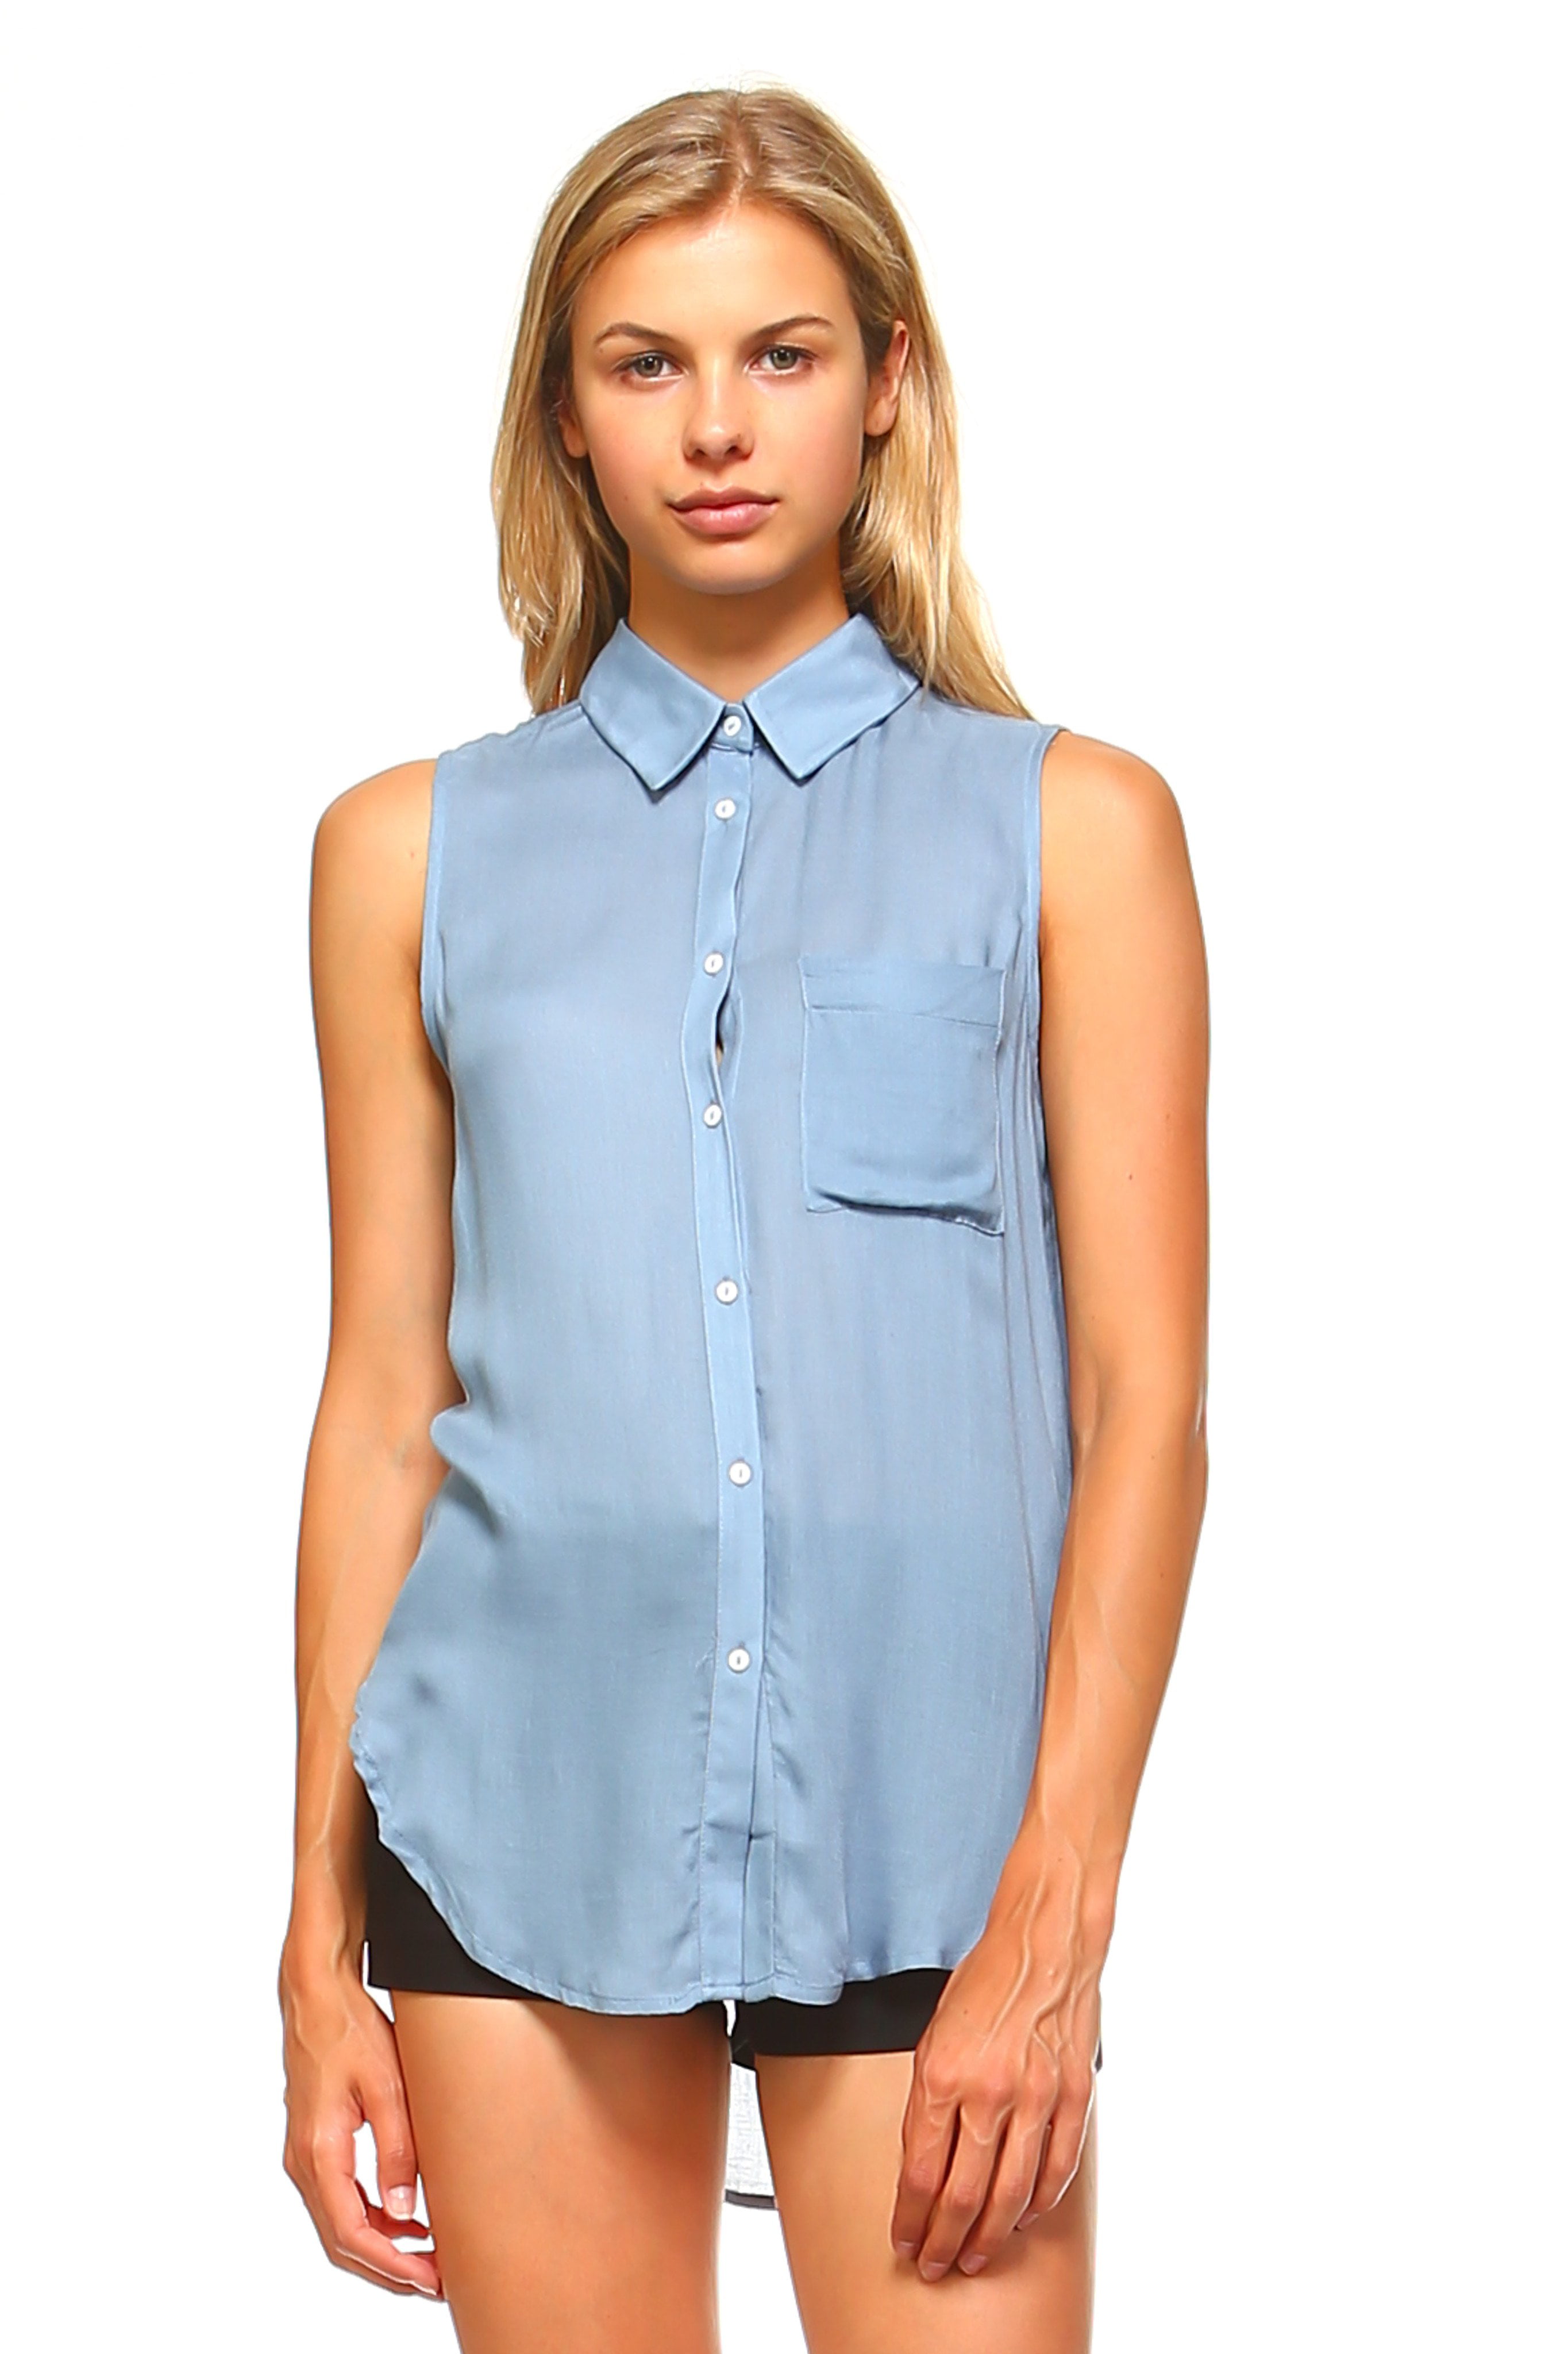 Exclusive - Exclusive Women's Sleeveless Sheer Button Down Blouse - Sky